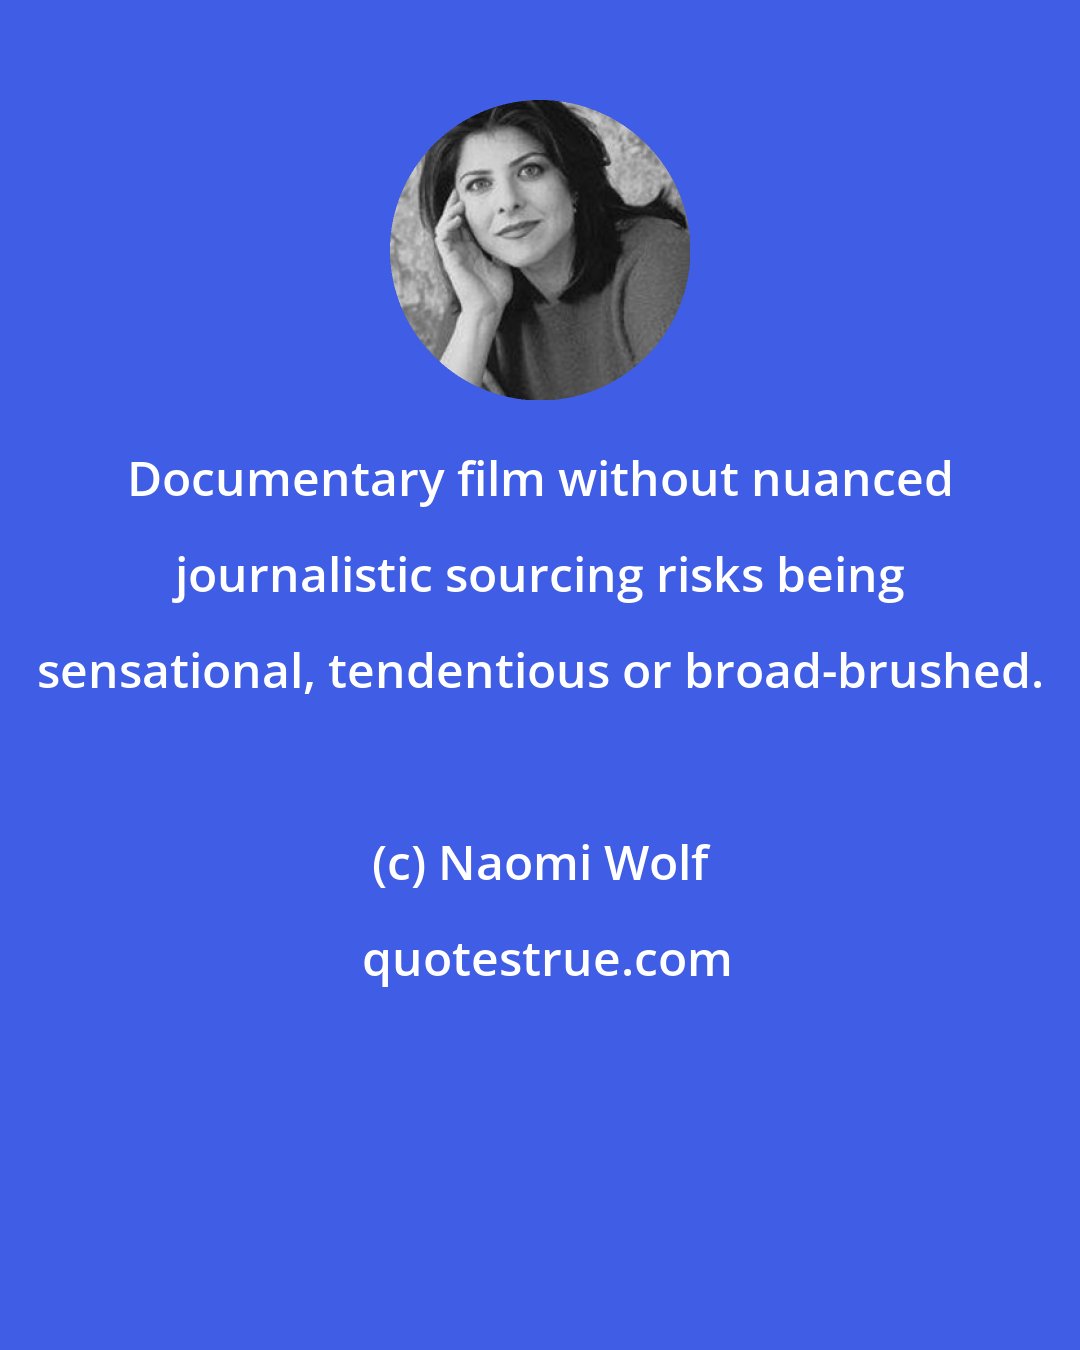 Naomi Wolf: Documentary film without nuanced journalistic sourcing risks being sensational, tendentious or broad-brushed.